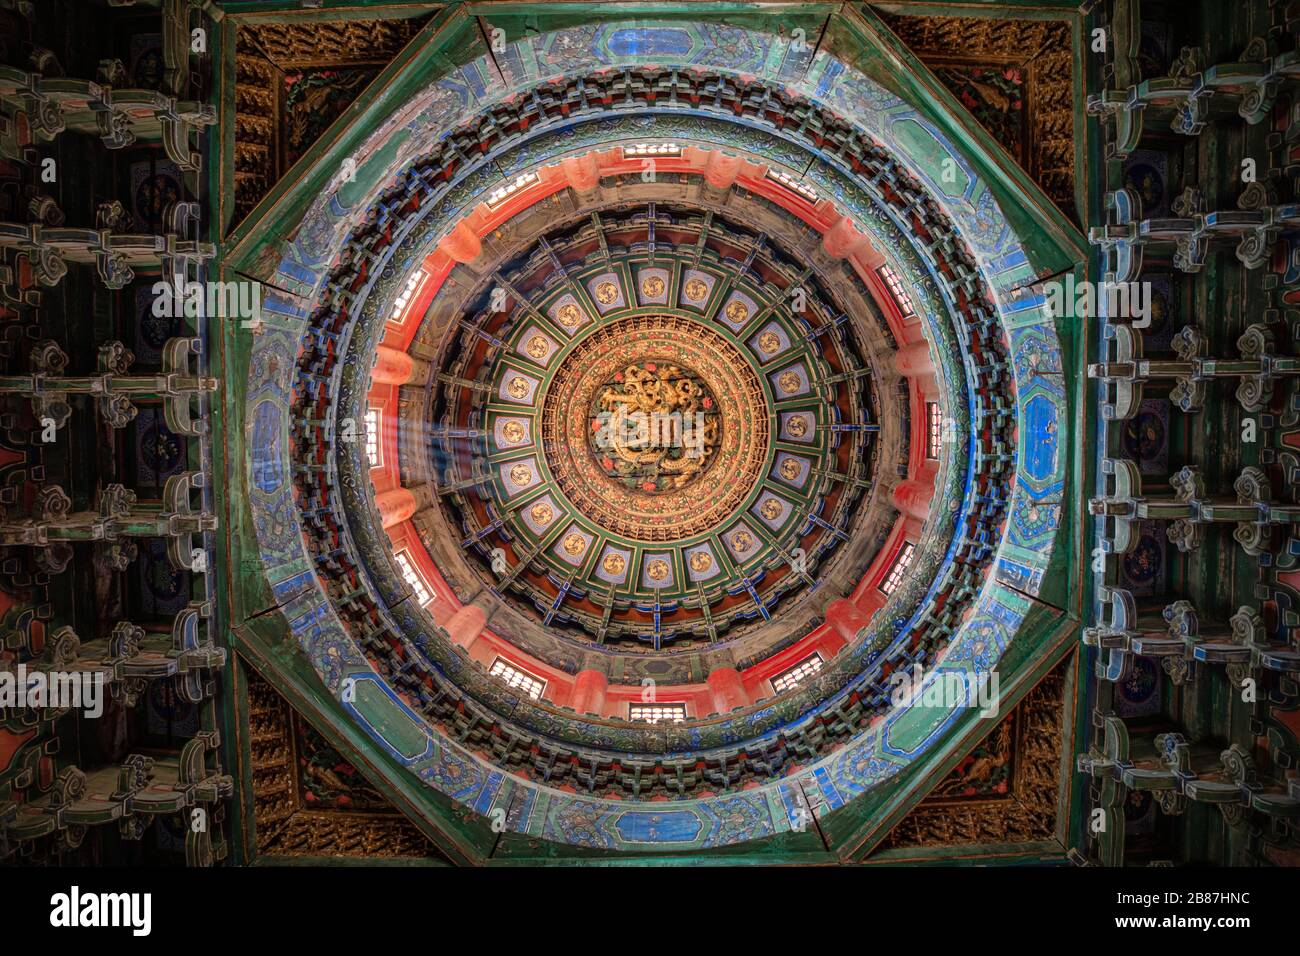 Autumn Pavilion Ceiling at Forbidden City in Beijing, China Stock Photo